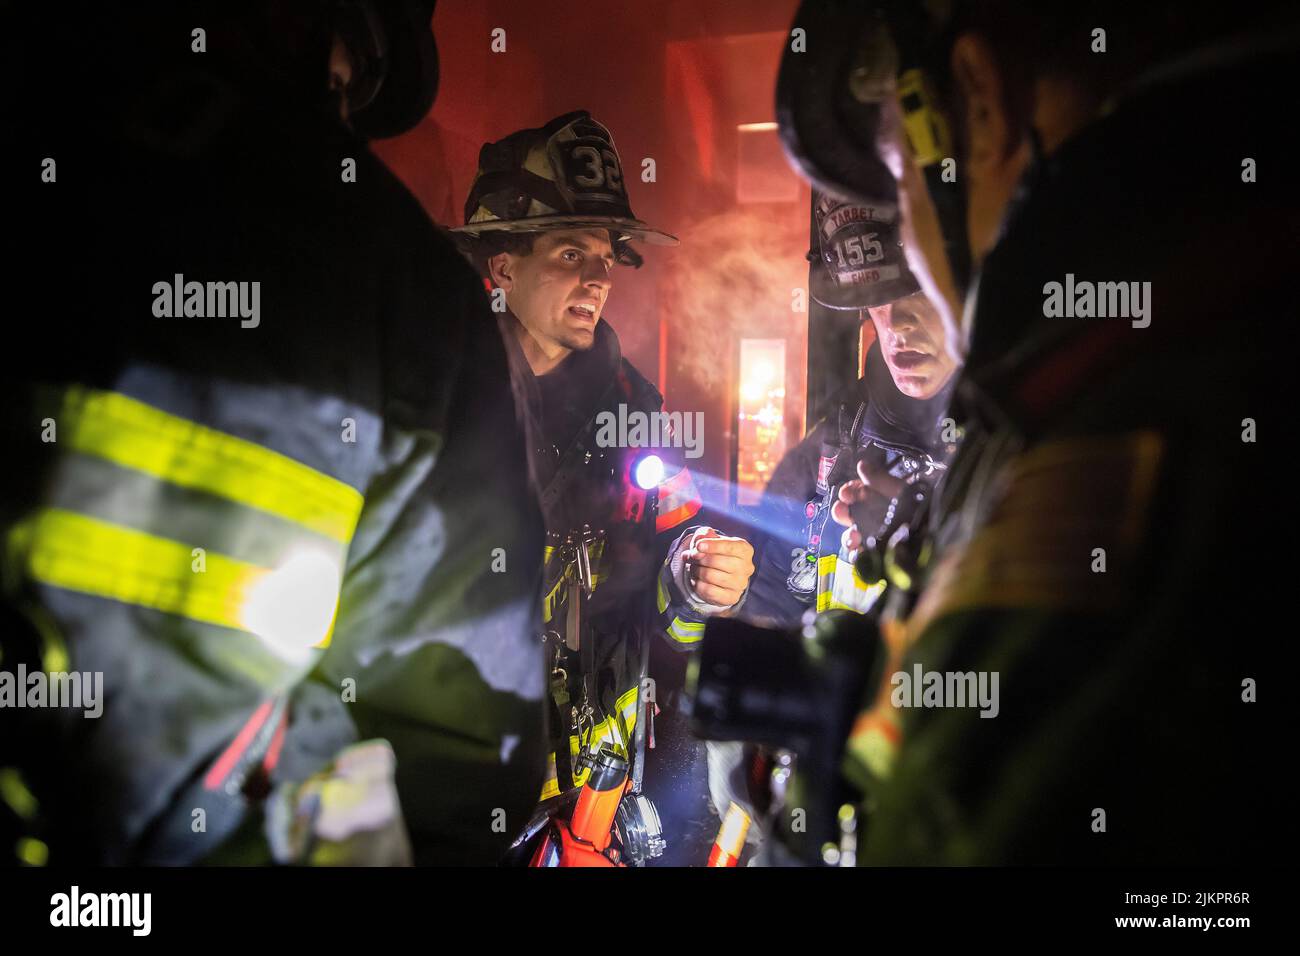 East Hampton Fire Department Assistant Chief Brian Stanis discusses strategies to attack the fire with his firefighters as at 12:08 a.m. on Monday mor Stock Photo